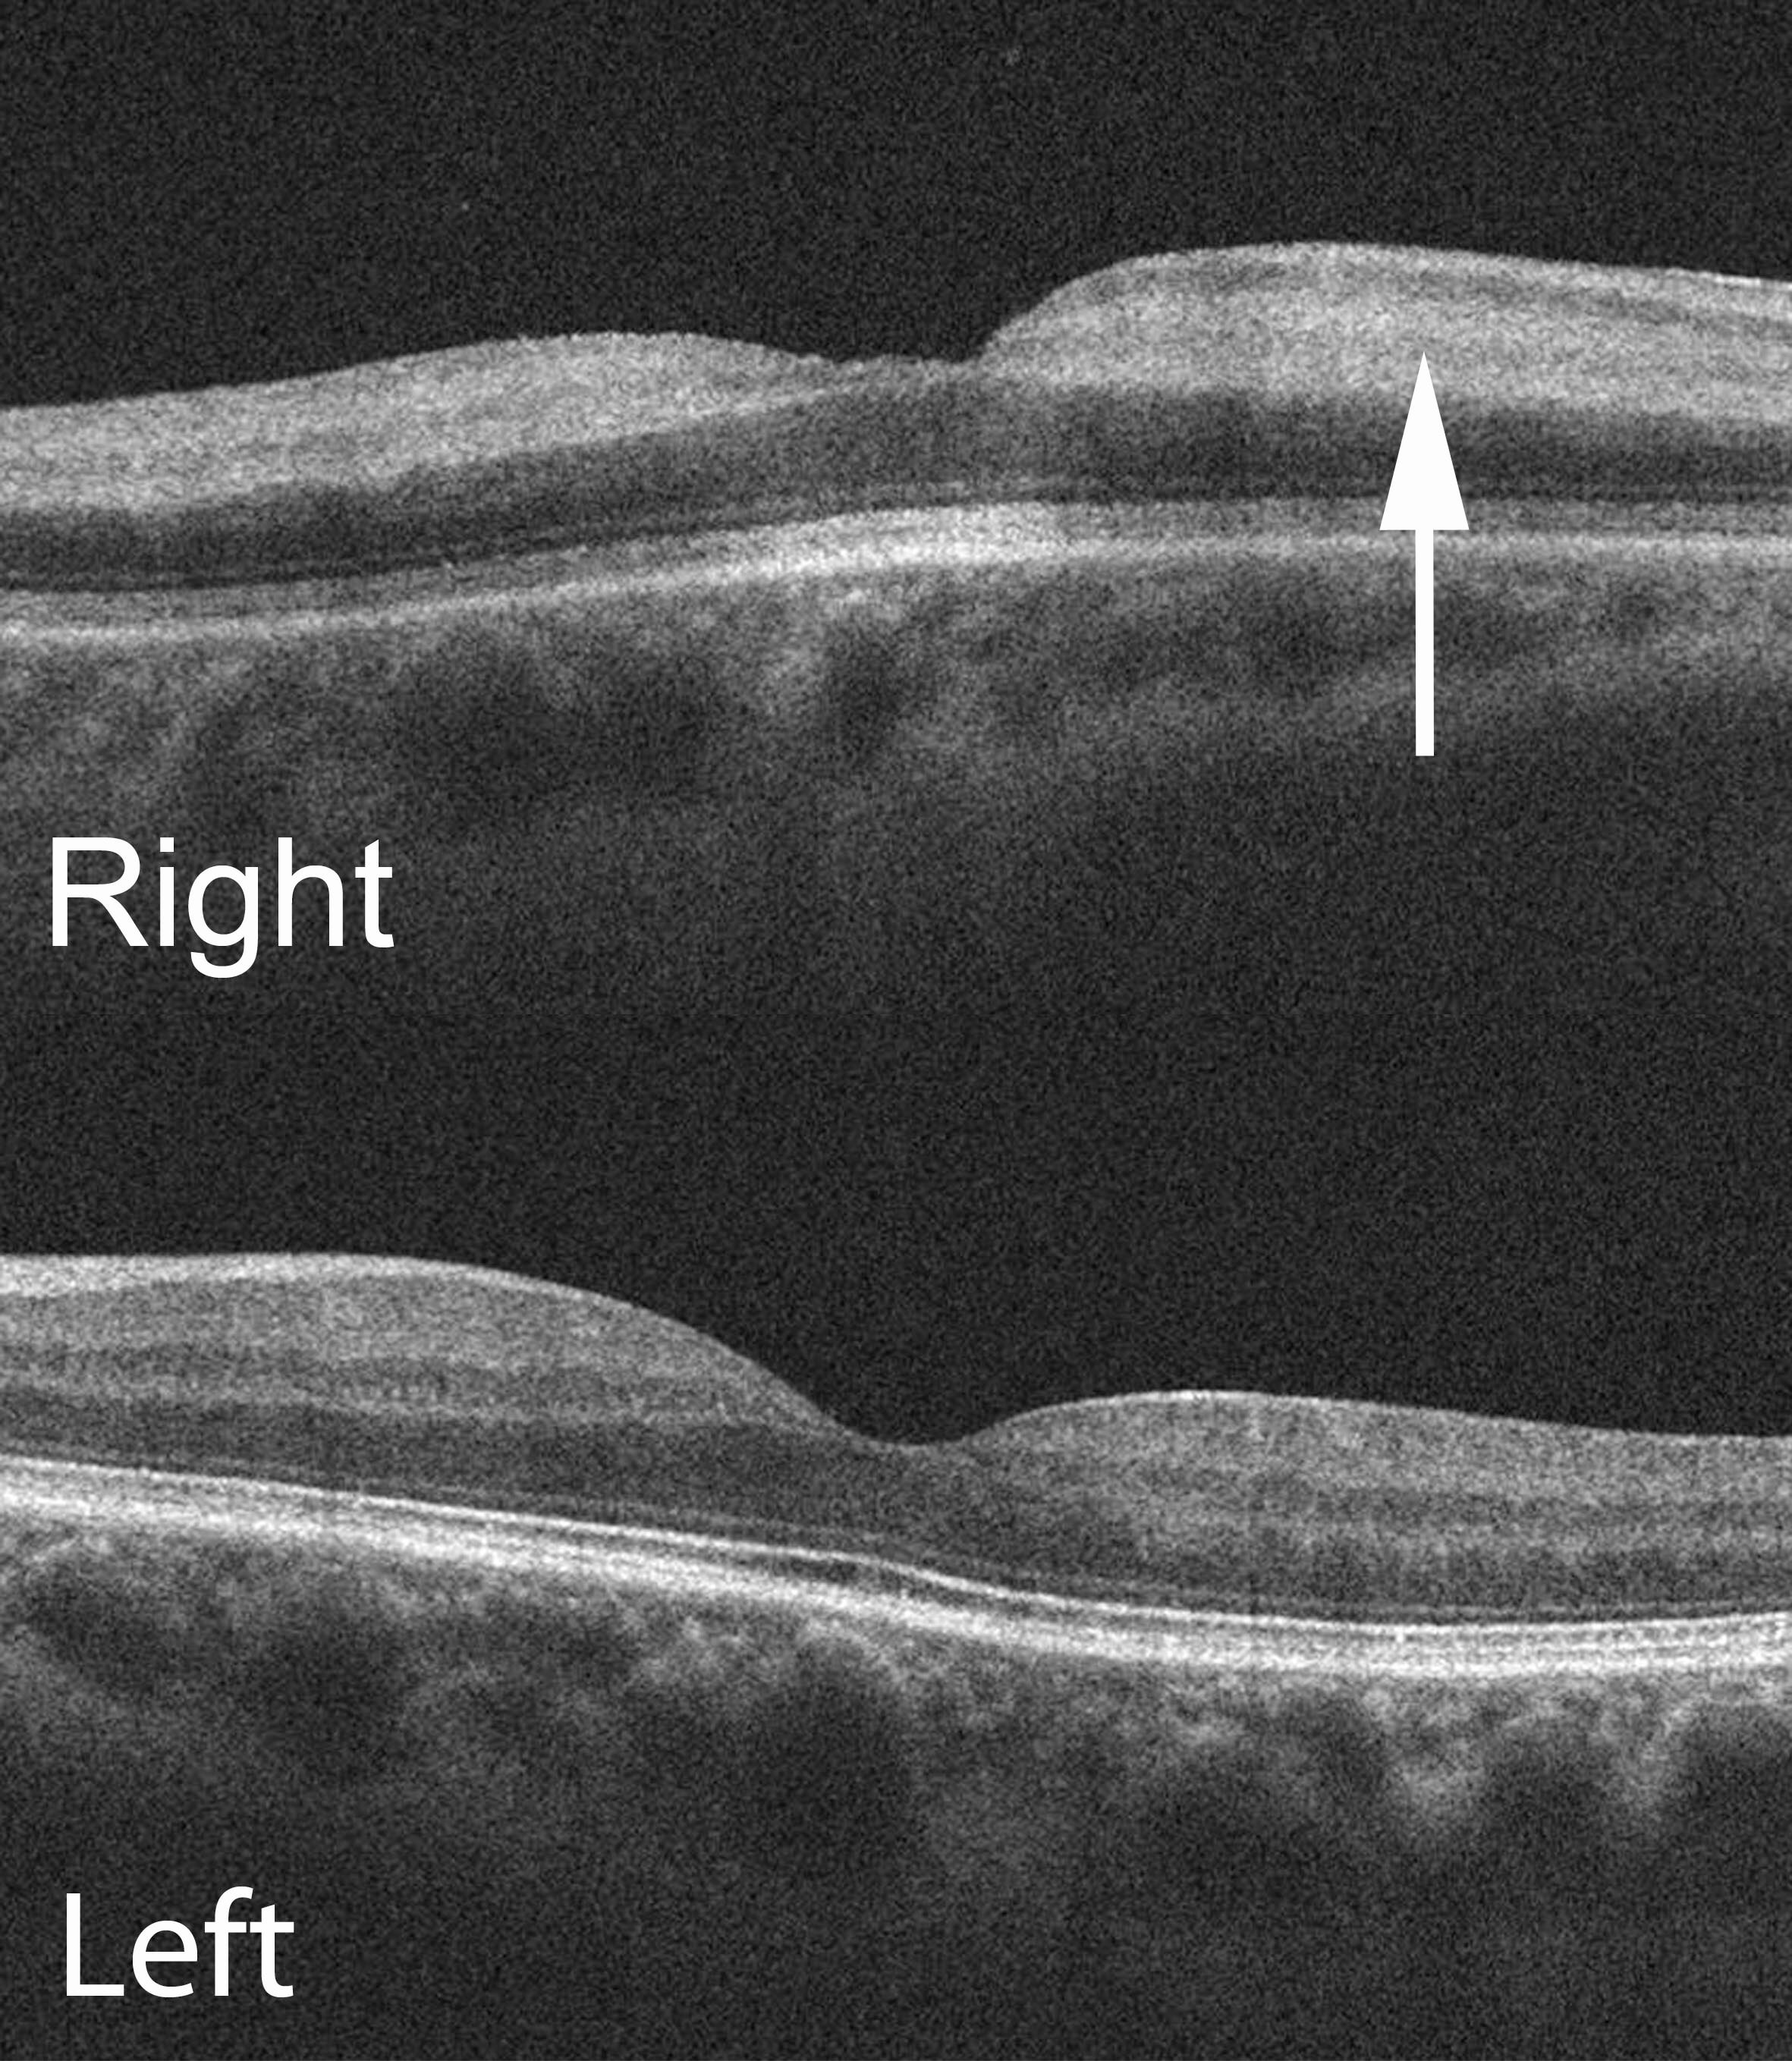 Right and Left optical coherence tomography (horizontal raster scans) through the macula demonstrate high reflectivity localized to the inner retina in the right eye.